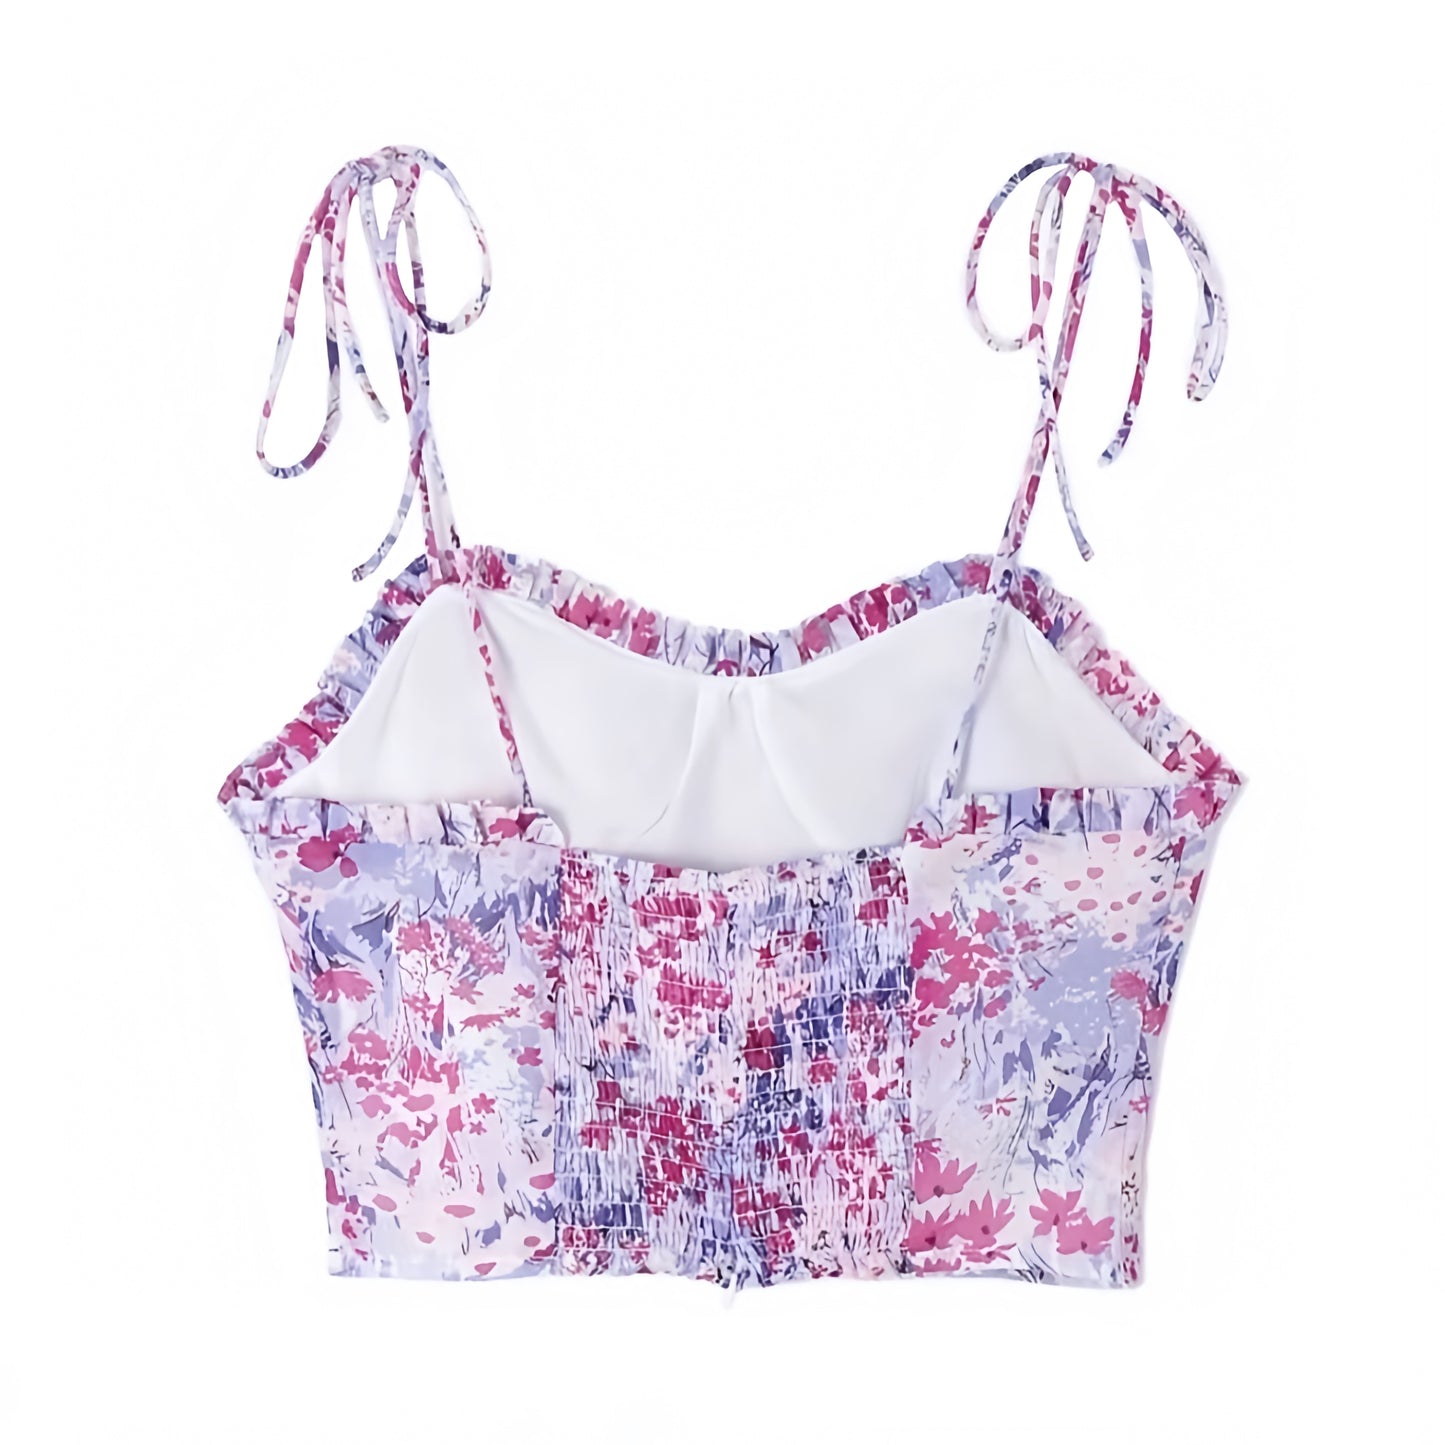 floral-print-pink-purple-multi-color-flower-patterned-slim-fit-corset-bustier-ruffle-trim-spaghetti-strap-sleeveless-backless-open-back-crop-cami-tank-top-blouse-spring-2024-summer-chic-trendy-women-ladies-elegant-casual-classy-feminine-semi-formal-preppy-style-zara-revolve-princess-polly-altard-state-urban-outfitters-loveshackfancy-fillyboo